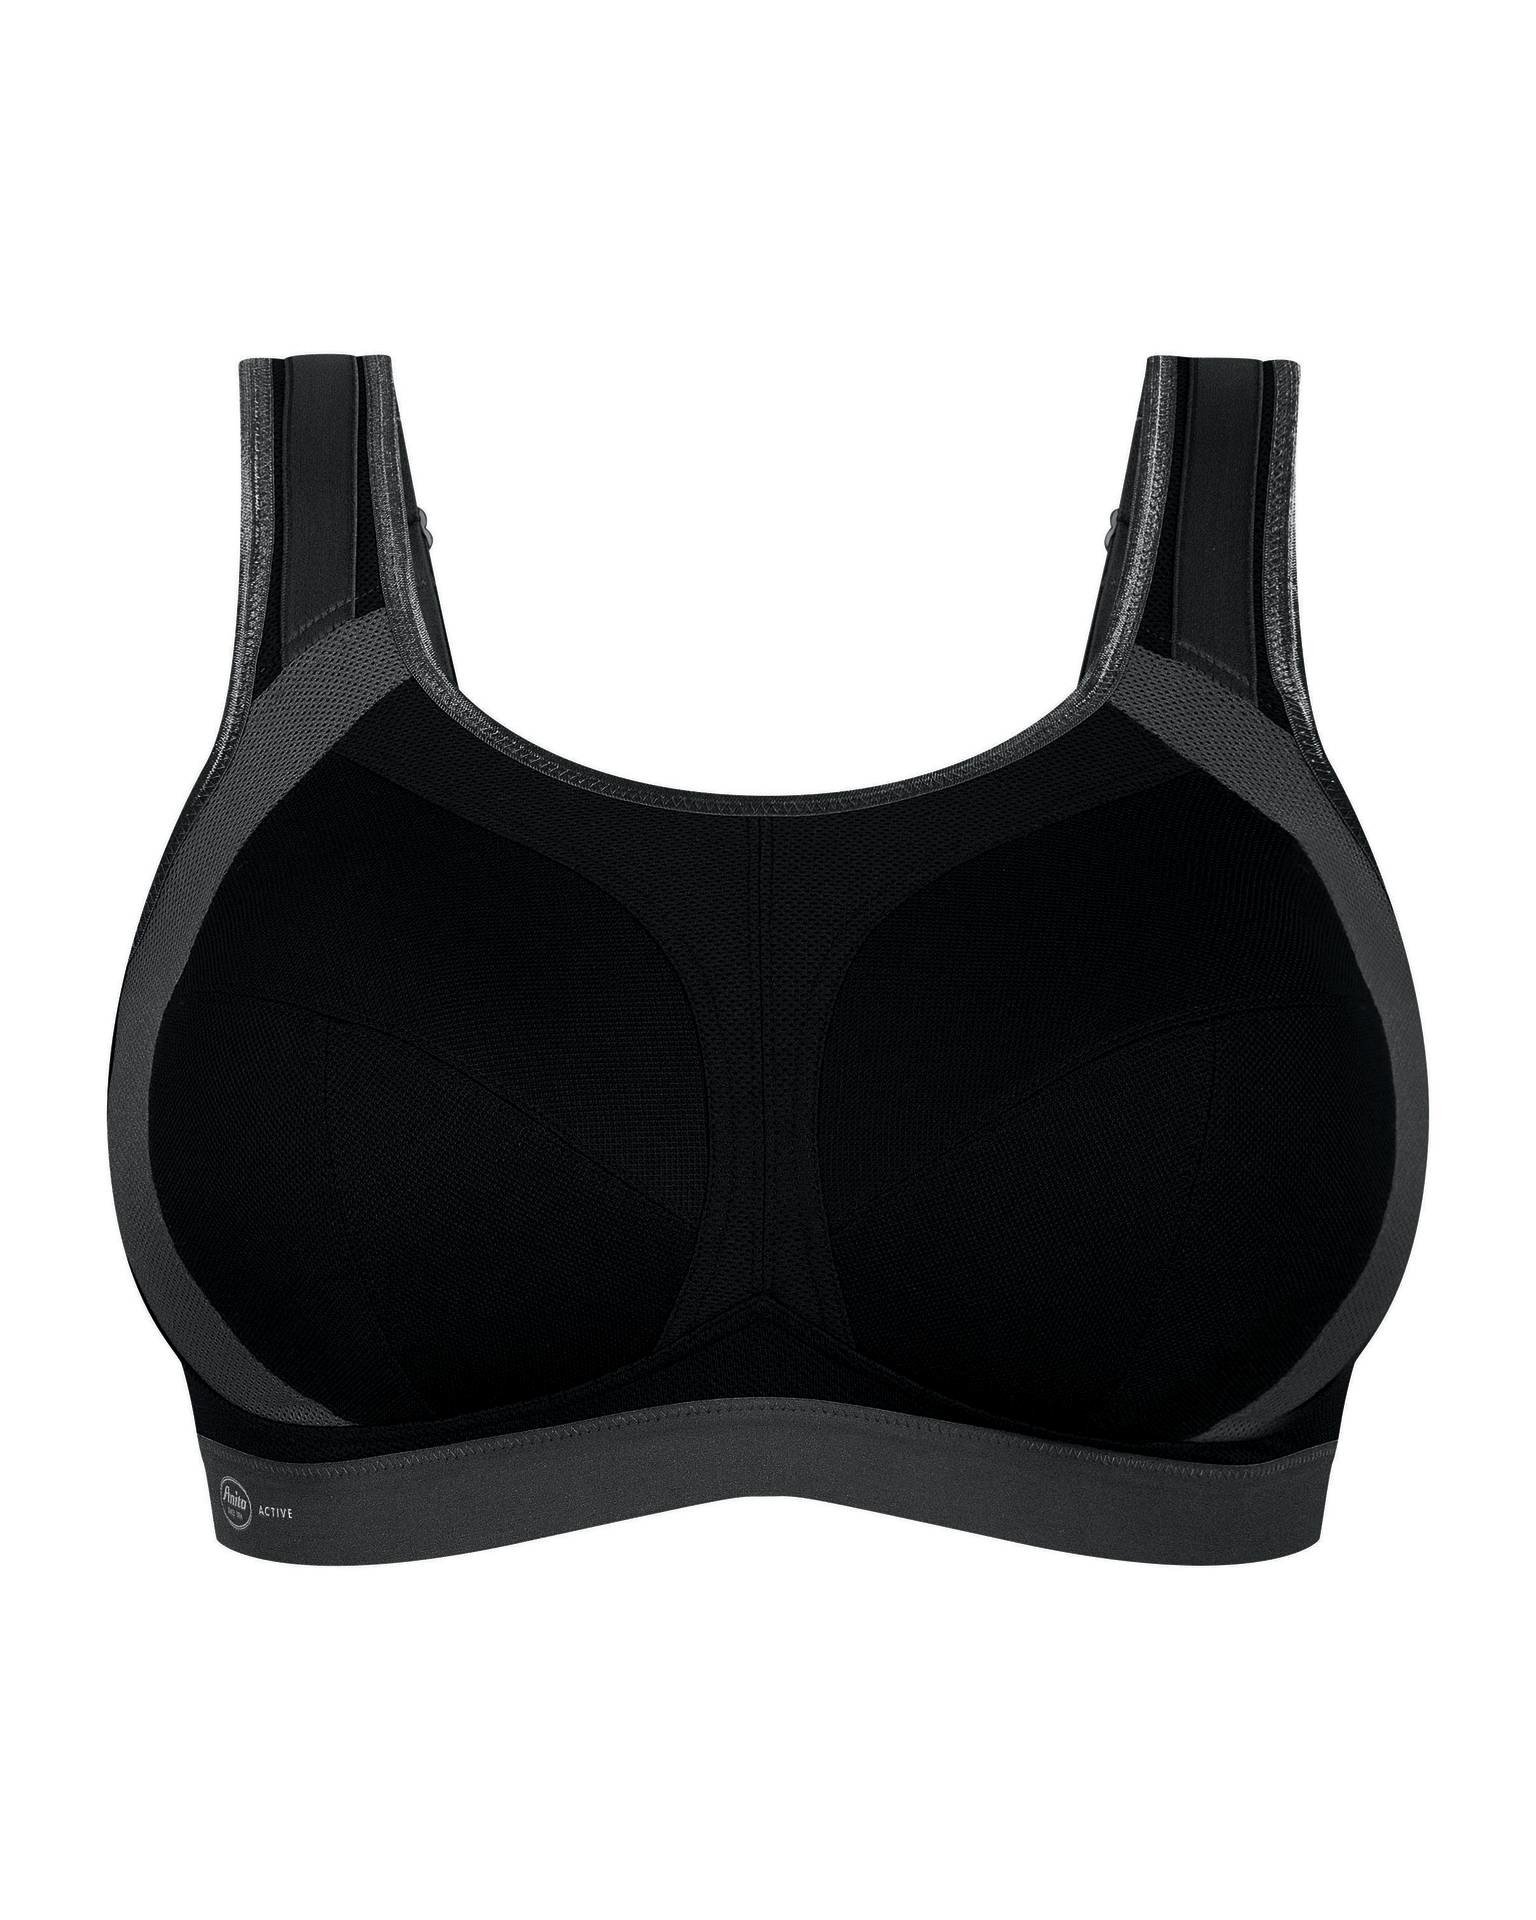 Extreme Control Plus Sport Bra Peacock/Anthracite 5567 - Lace & Day